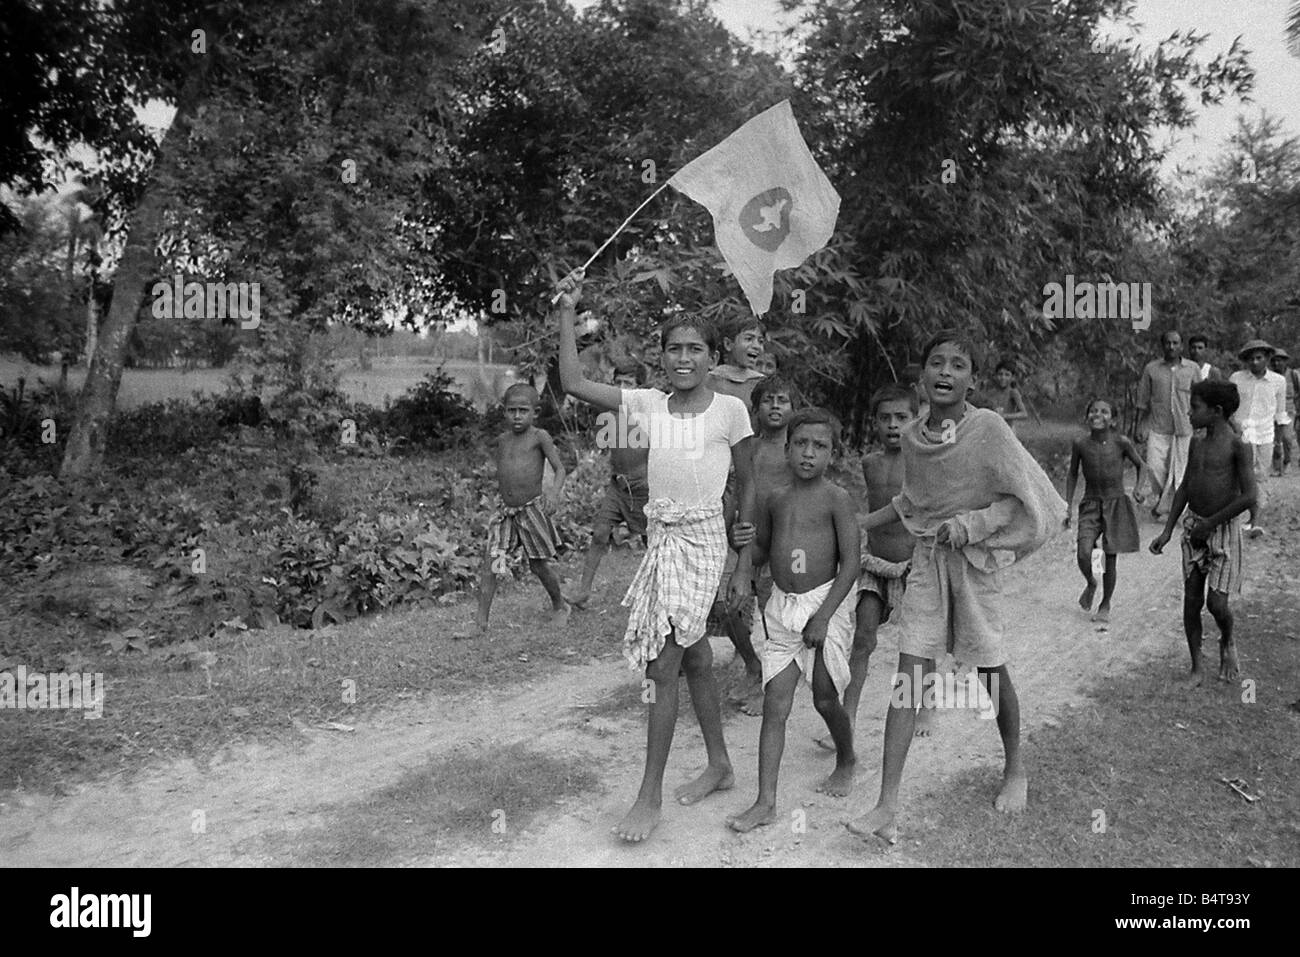 A large area of East Pakistan territory is under the control of the Bangladesh Freedom Fighters. These pictures were taken on patrol with an operational unit whose camp is in the Jungle just inside the Indian border.;Our Picture Shows: A group of children from one of the villages along the East Pakistan - Indian border greet the Bangladesh Freedom Fighters patrol. The children are waving the flag of the BFF Stock Photo